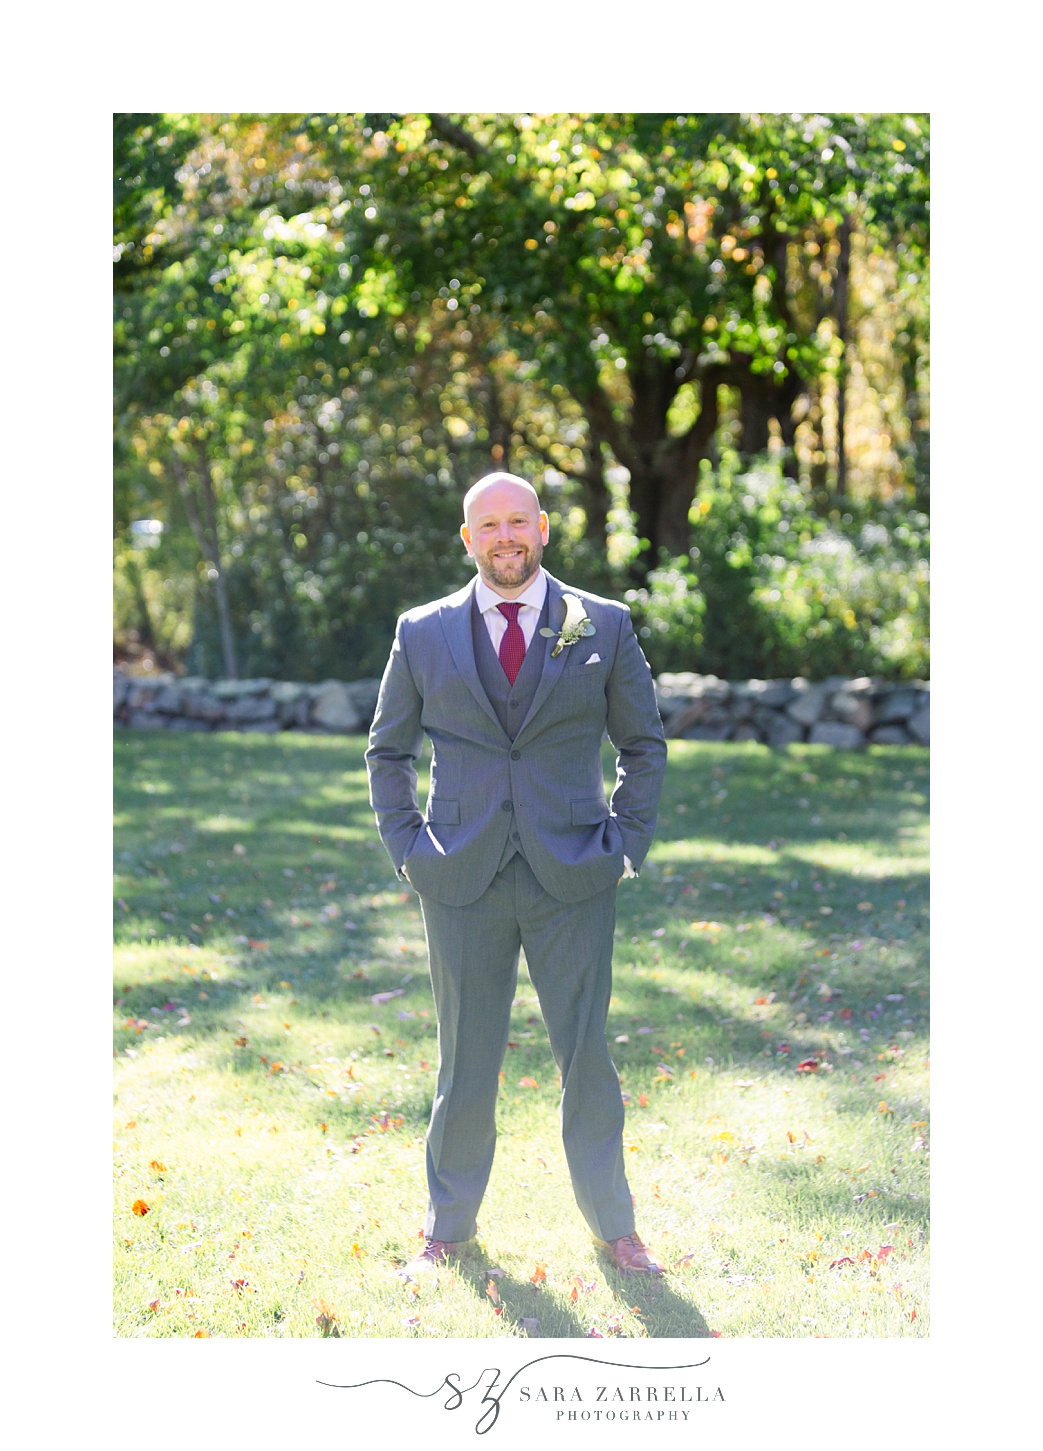 groom in grey suit poses in grass